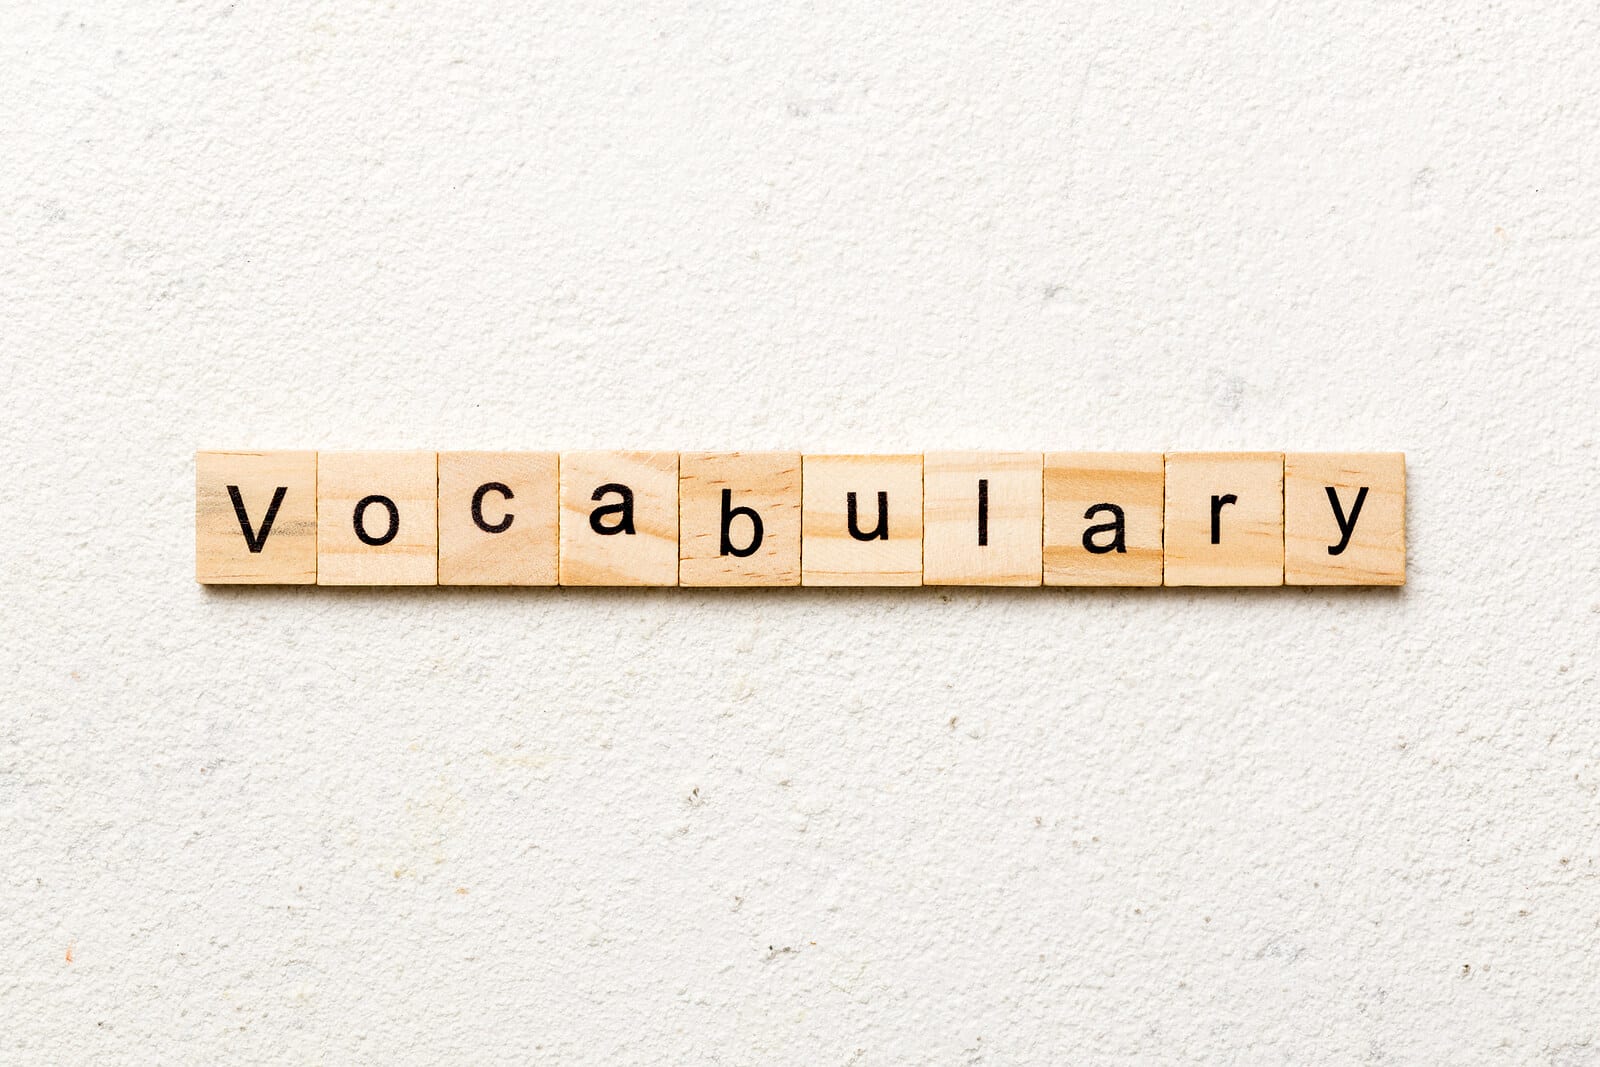 Vocabulary written on wooden blocks. SEO Services could be what your practice needs to grow! Learn more from our SEO specialists. 